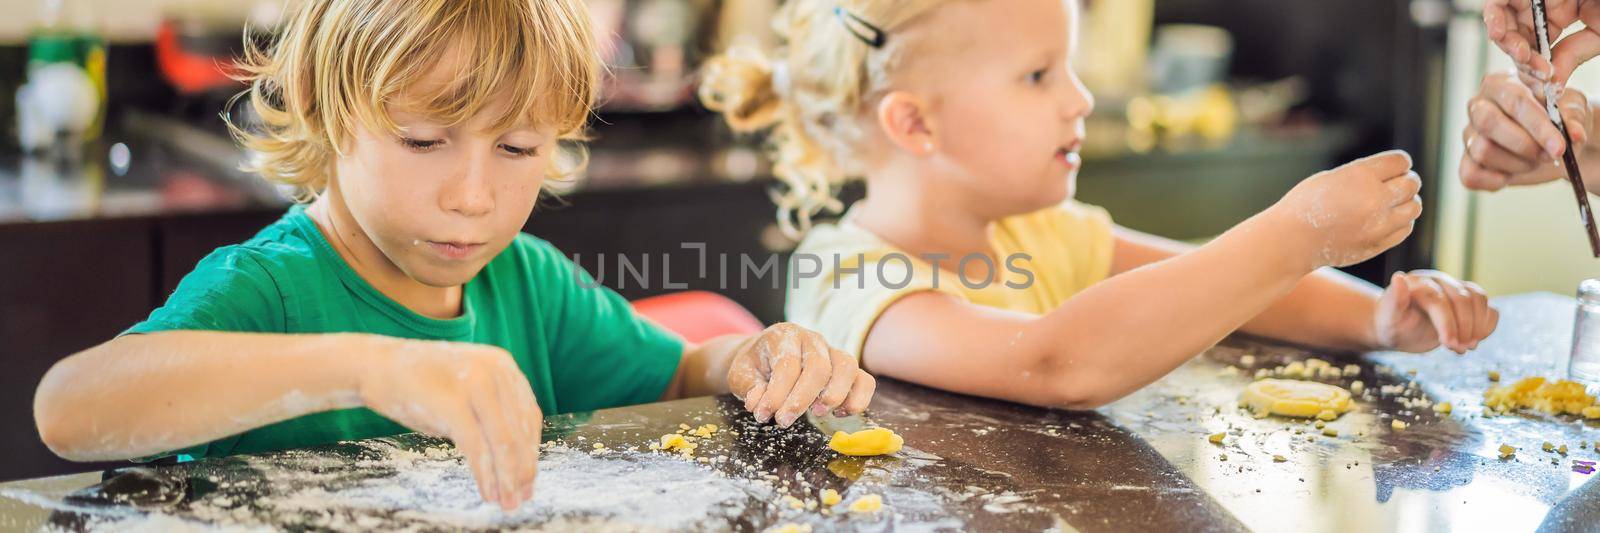 Two children a boy and a girl make cookies from dough. BANNER, LONG FORMAT